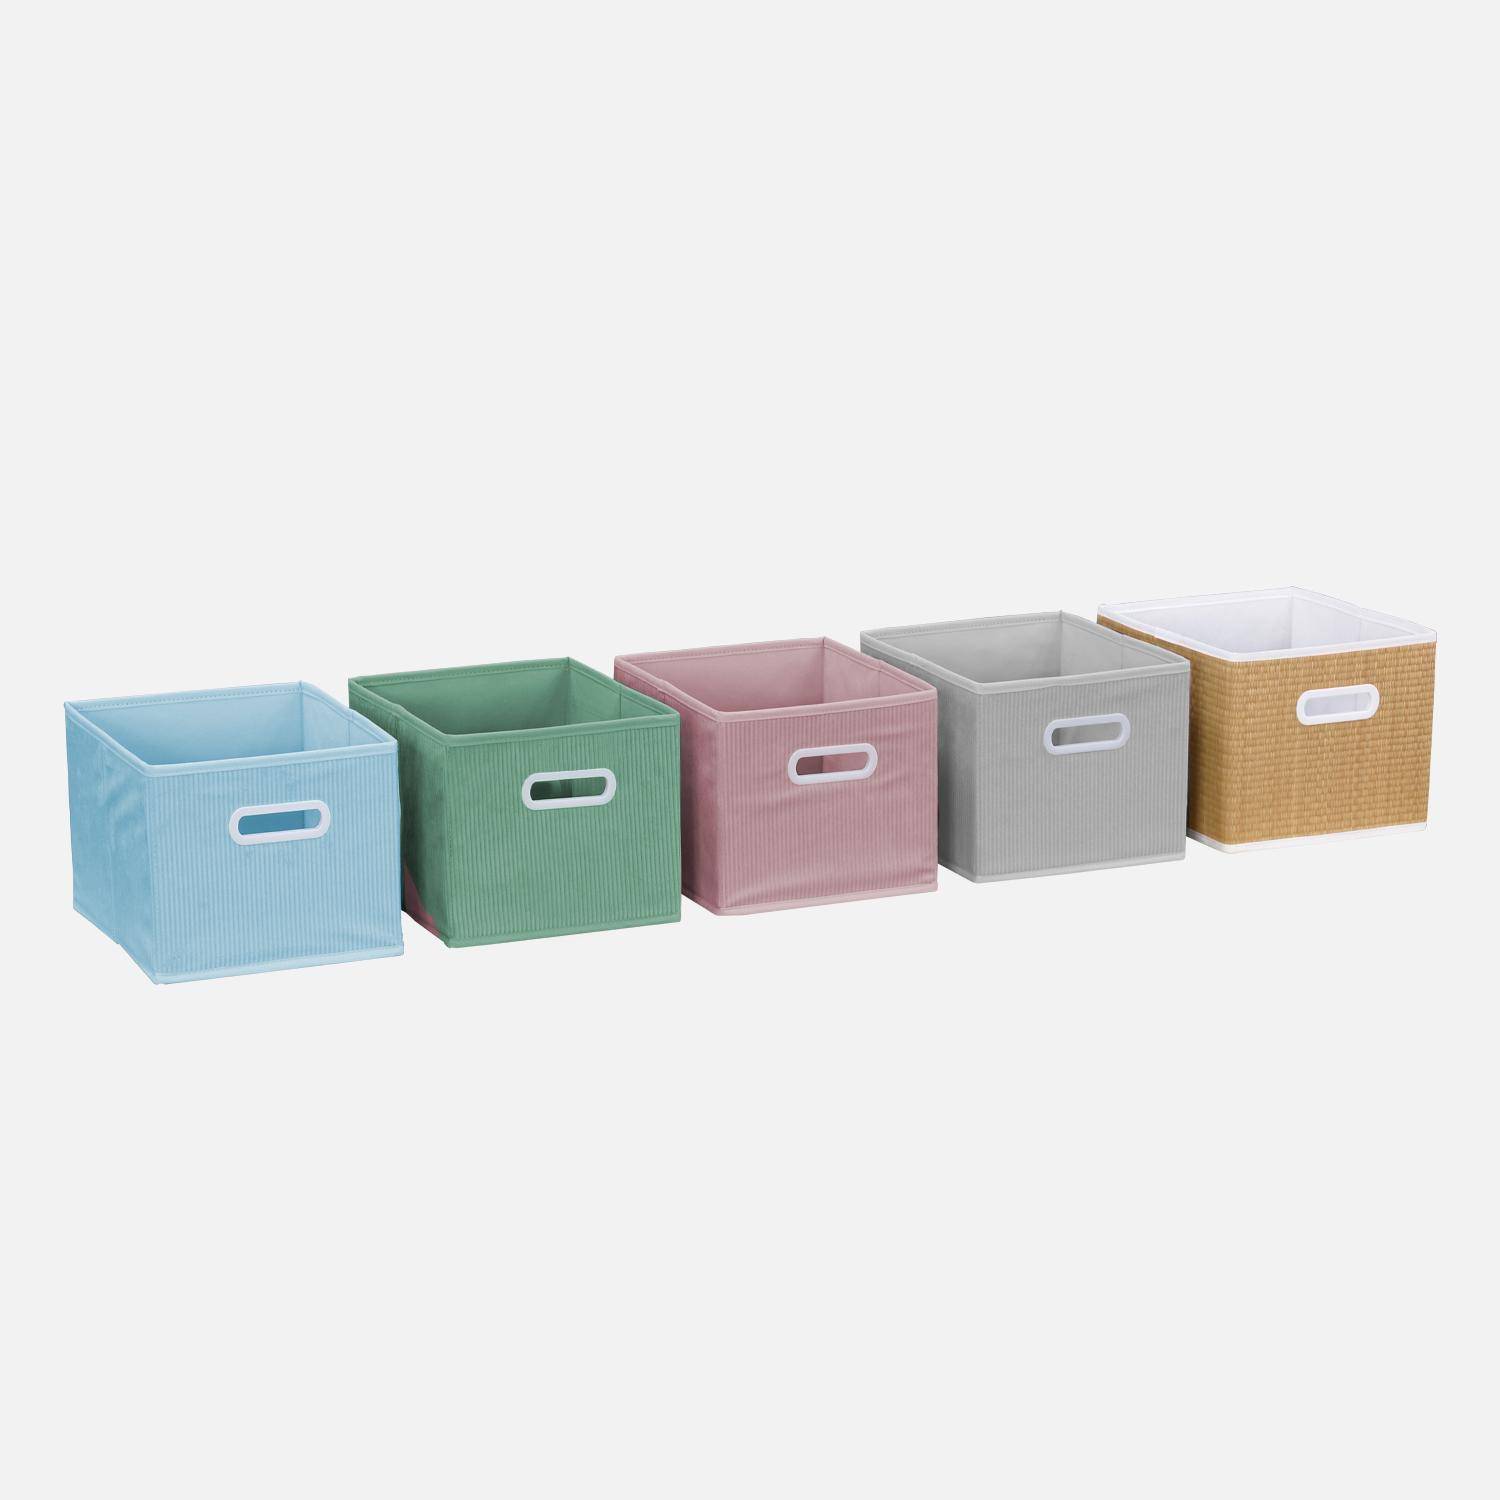 Storage unit for children with 7 compartments and 3 blue and 3 grey velvet baskets Photo4